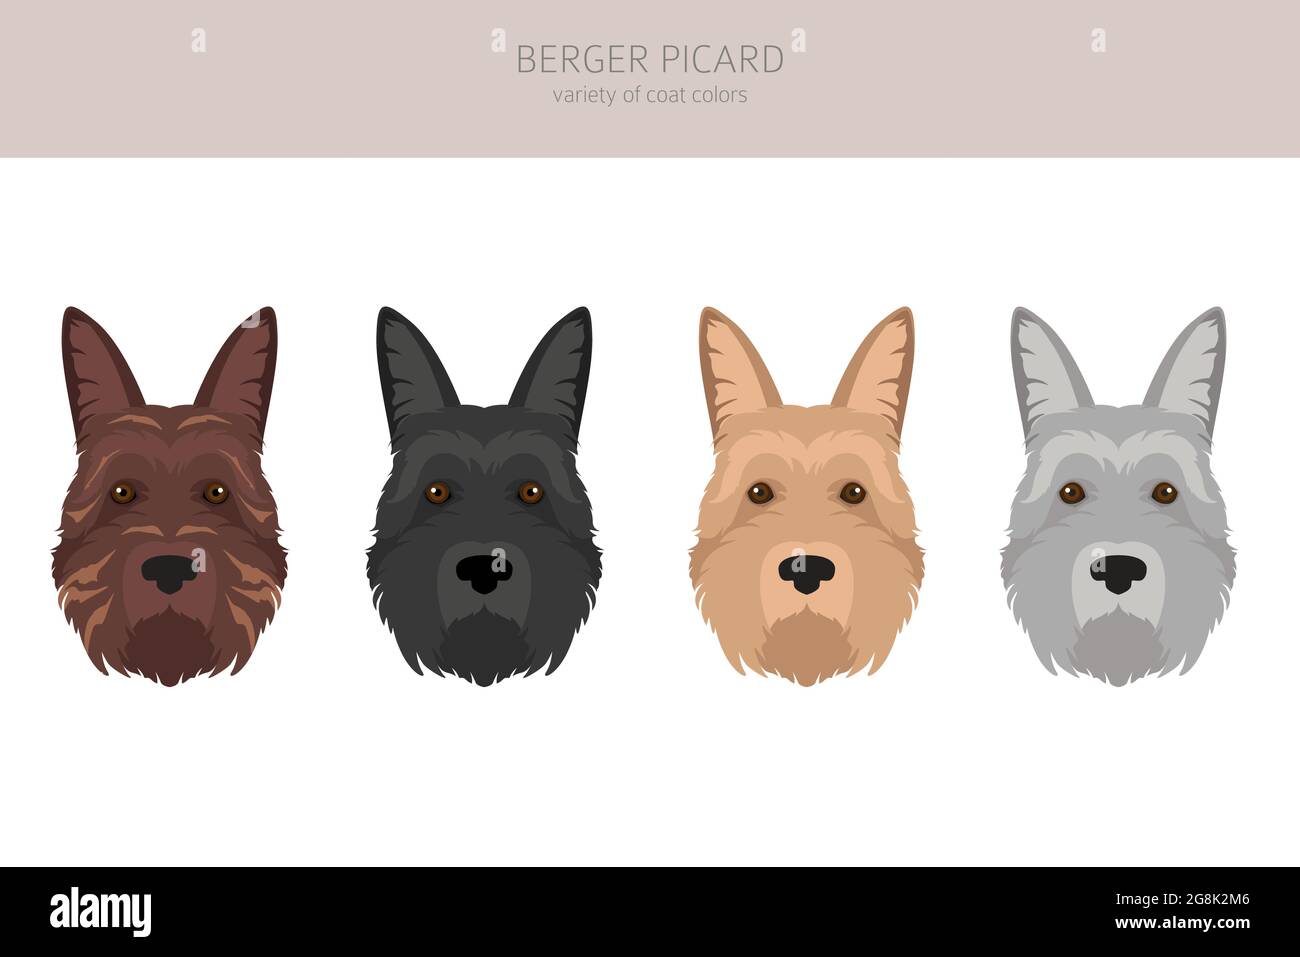 Berger picard clipart. Different coat colors and poses set.  Vector illustration Stock Vector